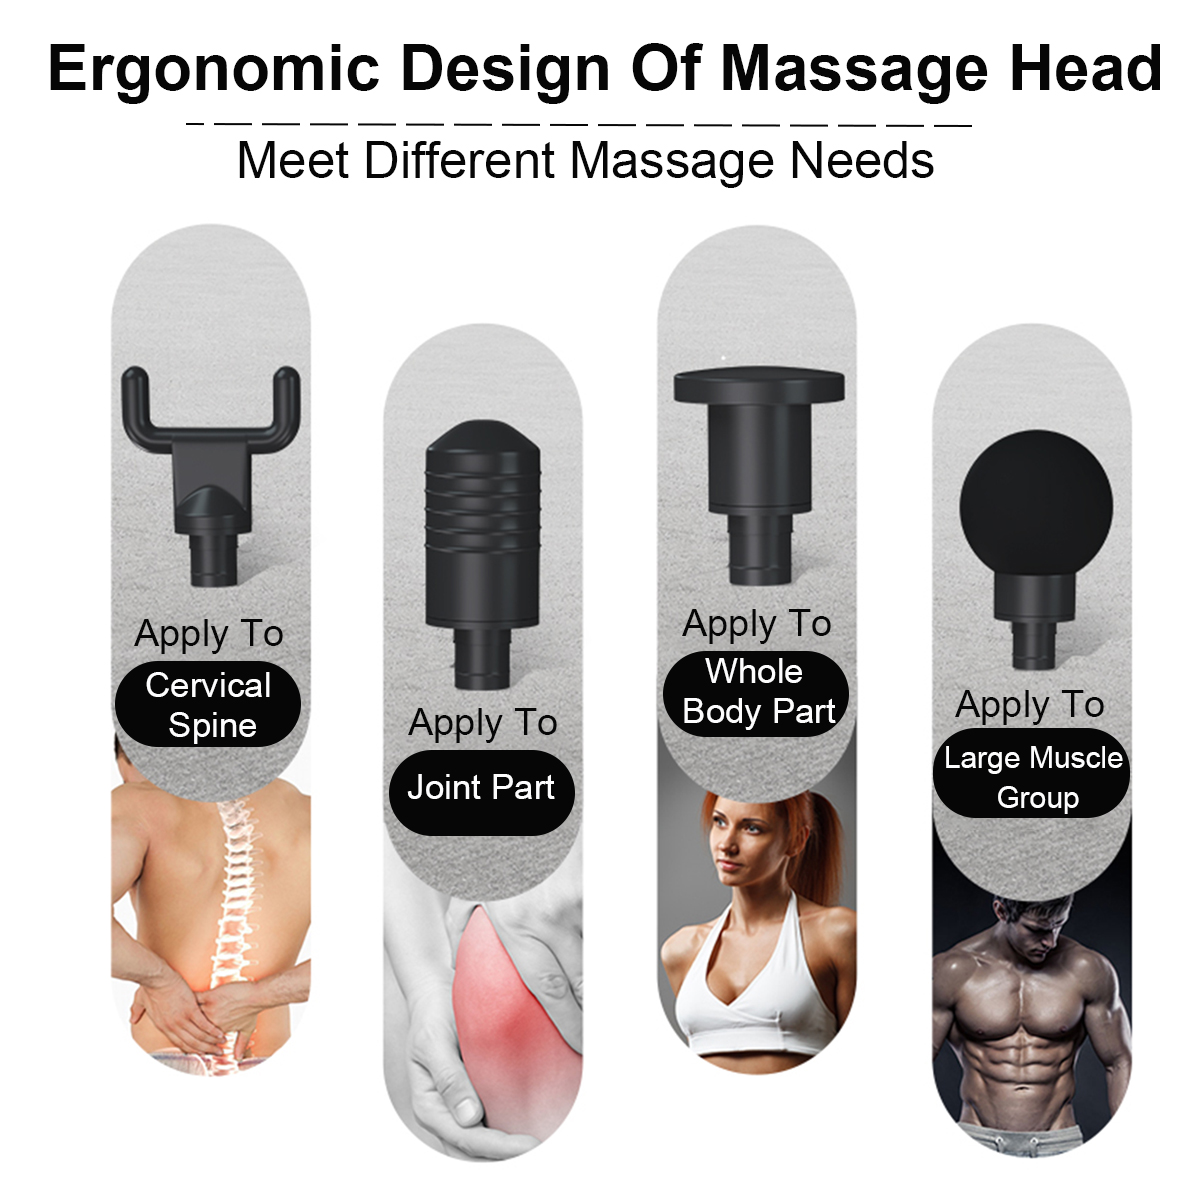 2400-mAh-Percussion-Massage-Deep-Tissue-Electric-Massager-Cordless-Massag-Device-for-Body-Pain-Relie-1536268-6